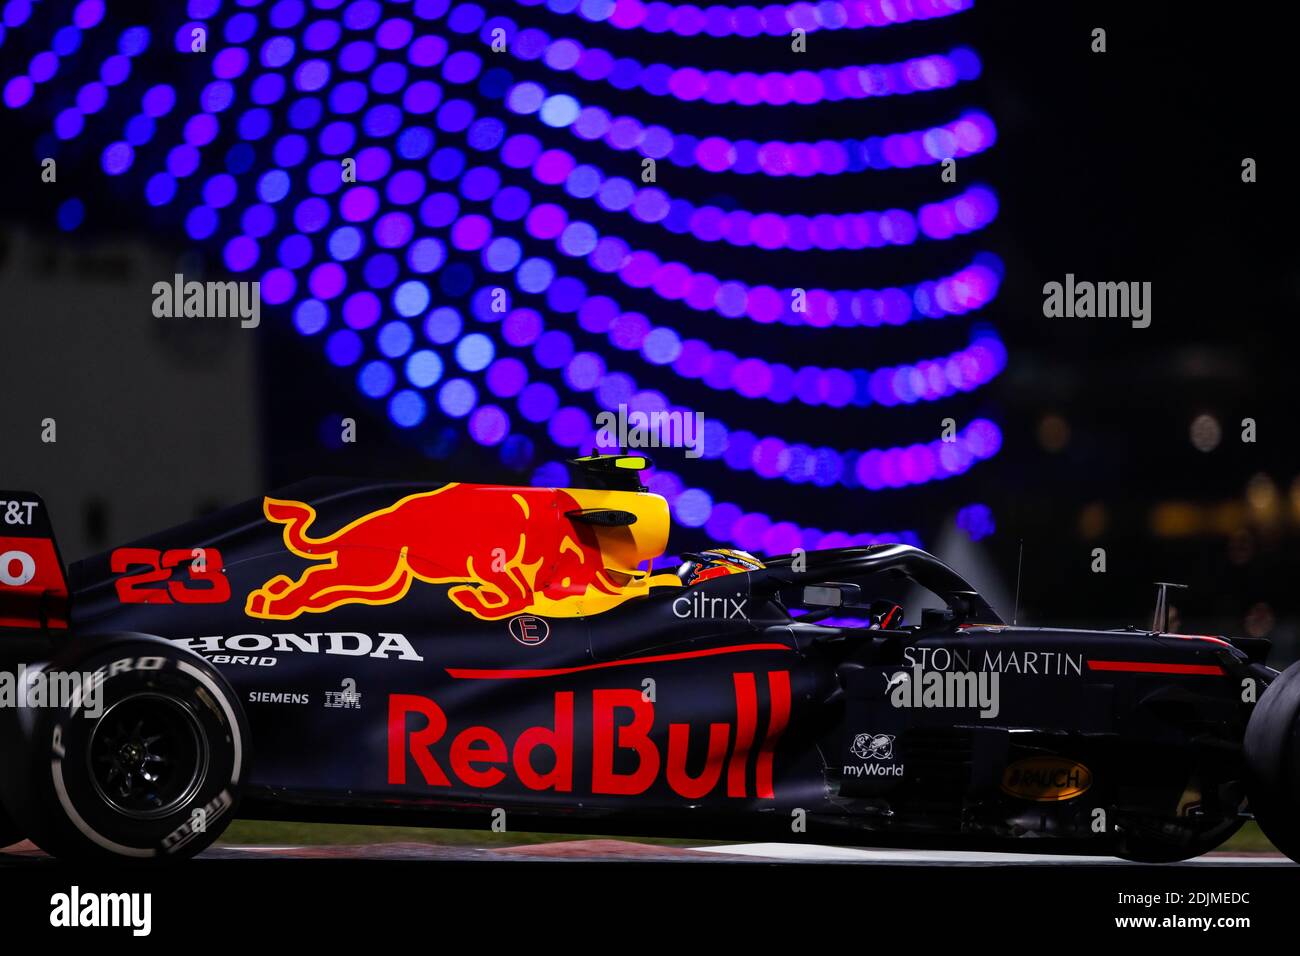 Red Bull knowledge of RB16 to benefit 2021 Bspec car